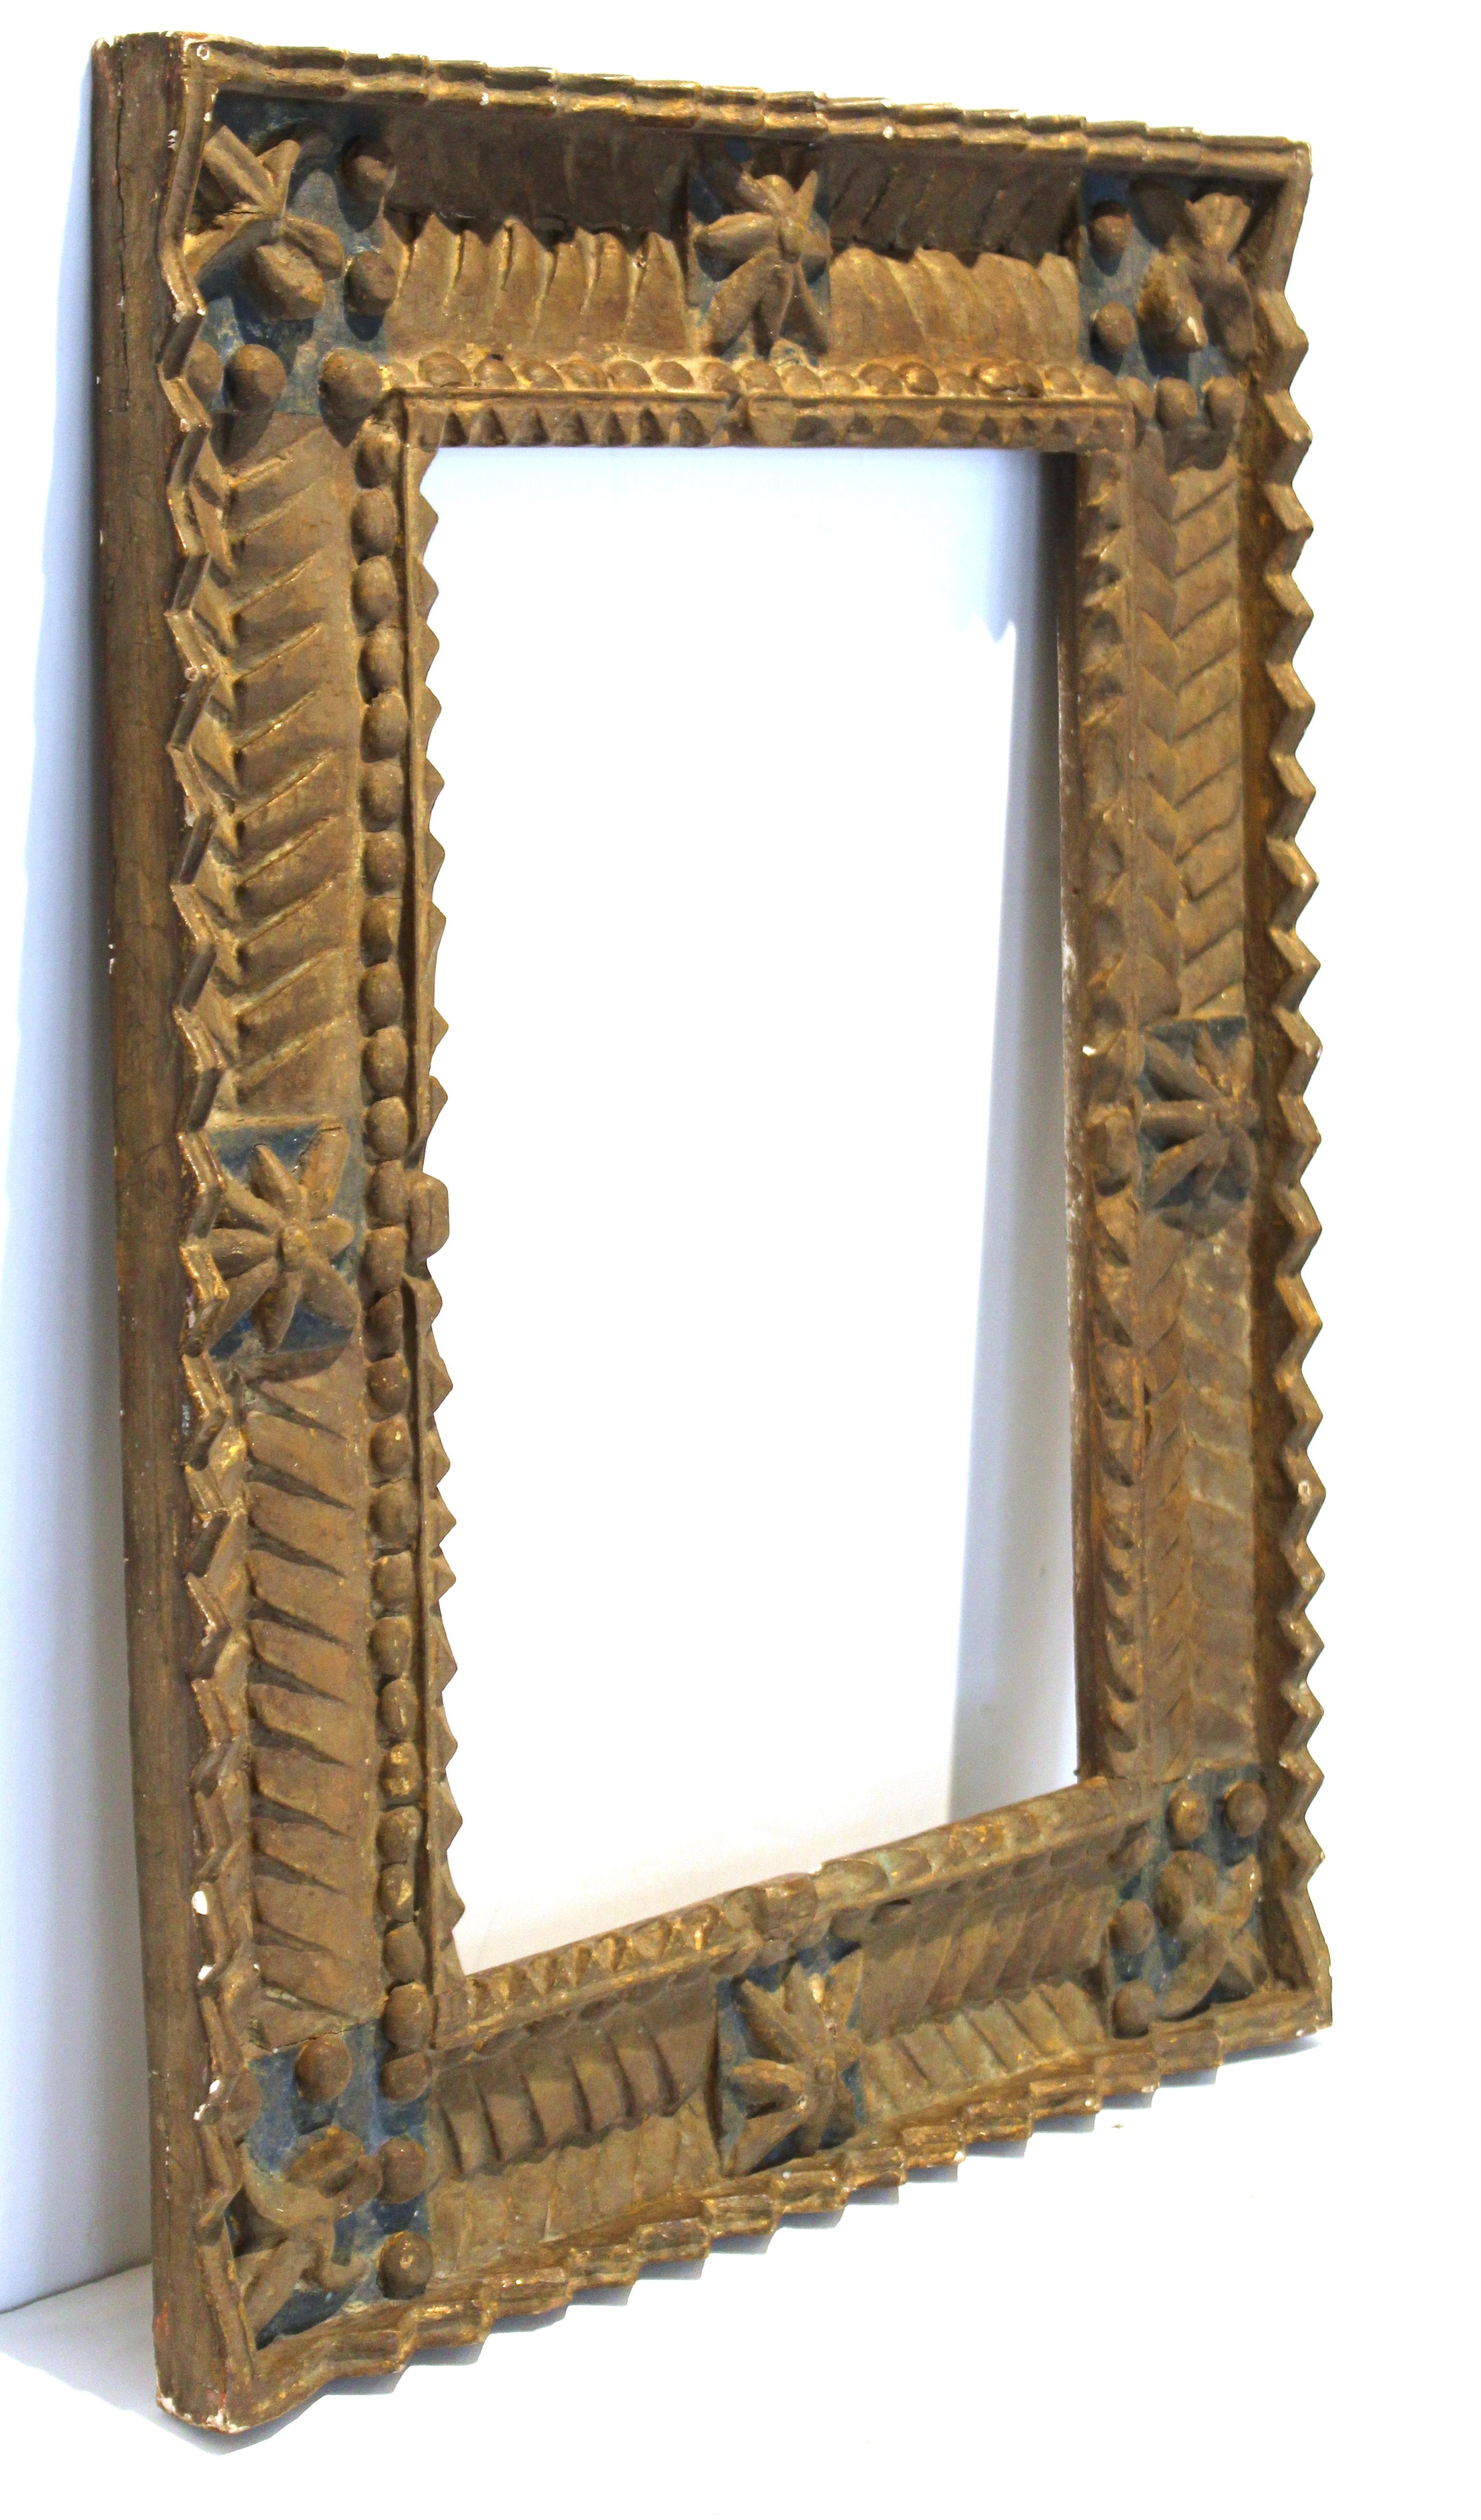 Spanish Colonial Baroque picture frame in wood with deeply carved geometric motif and floral elements in the corners. The piece was made in South America in the 18th century and retains traces of its original gilding and blue paint.
In great